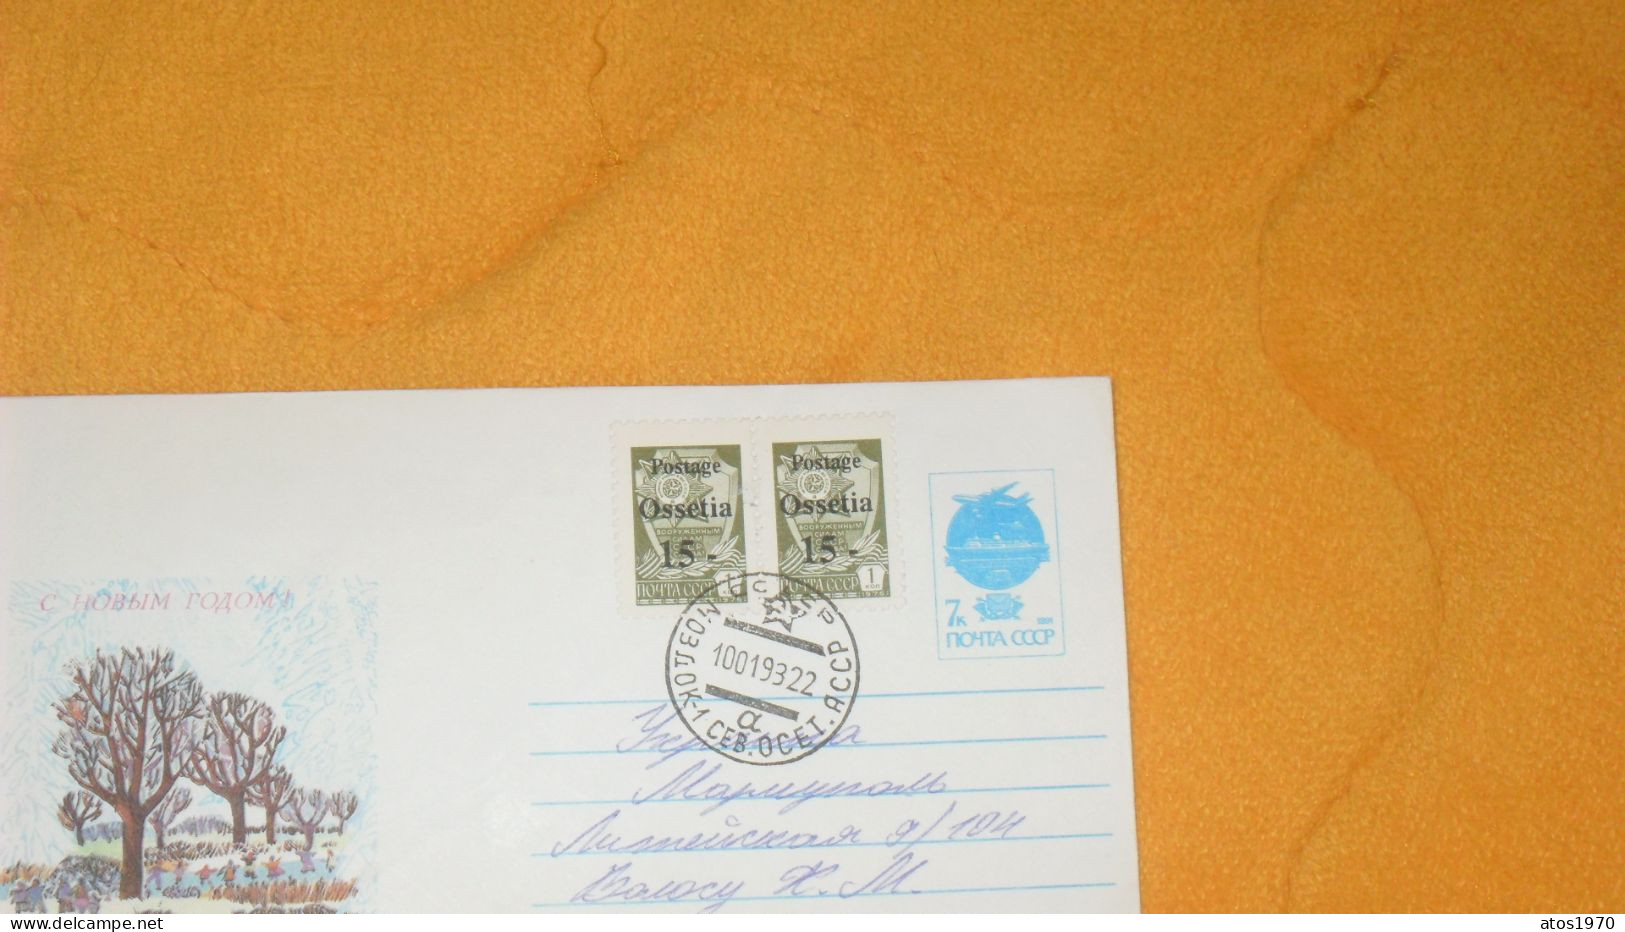 ENVELOPPE DE 1993../ CACHETS A IDENTIFIER RUSSIE..+ TIMBRES X3 DONT 2 SURCHARGES POSTAGE OSSETIA.. - Covers & Documents